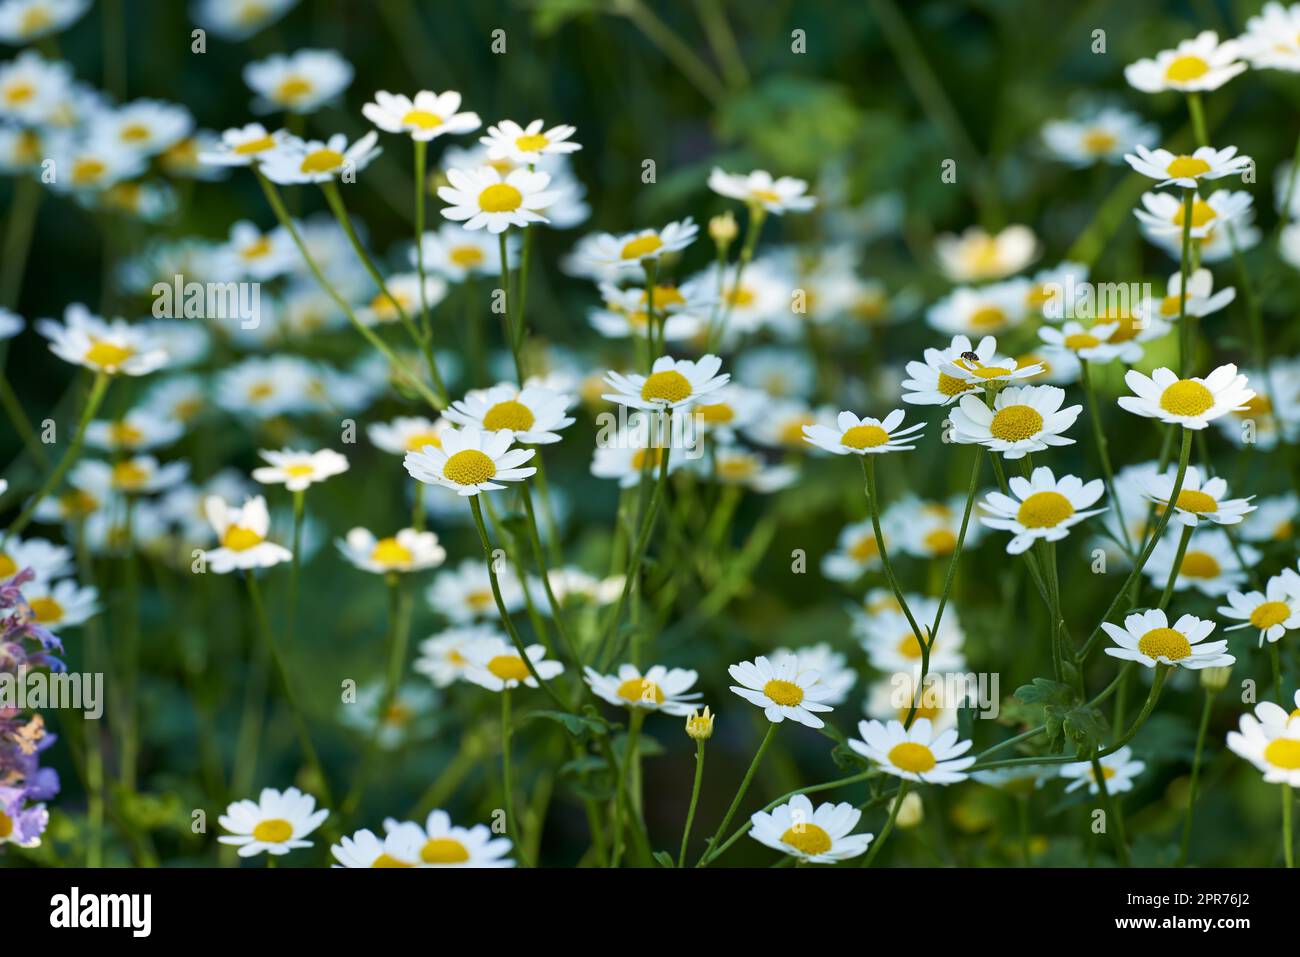 Many daisy flowers growing in a scenic green botanical garden. Bright white marguerite flowering plants on a grassy field in spring. Pretty flowers flourishing in a lush meadow in nature Stock Photo